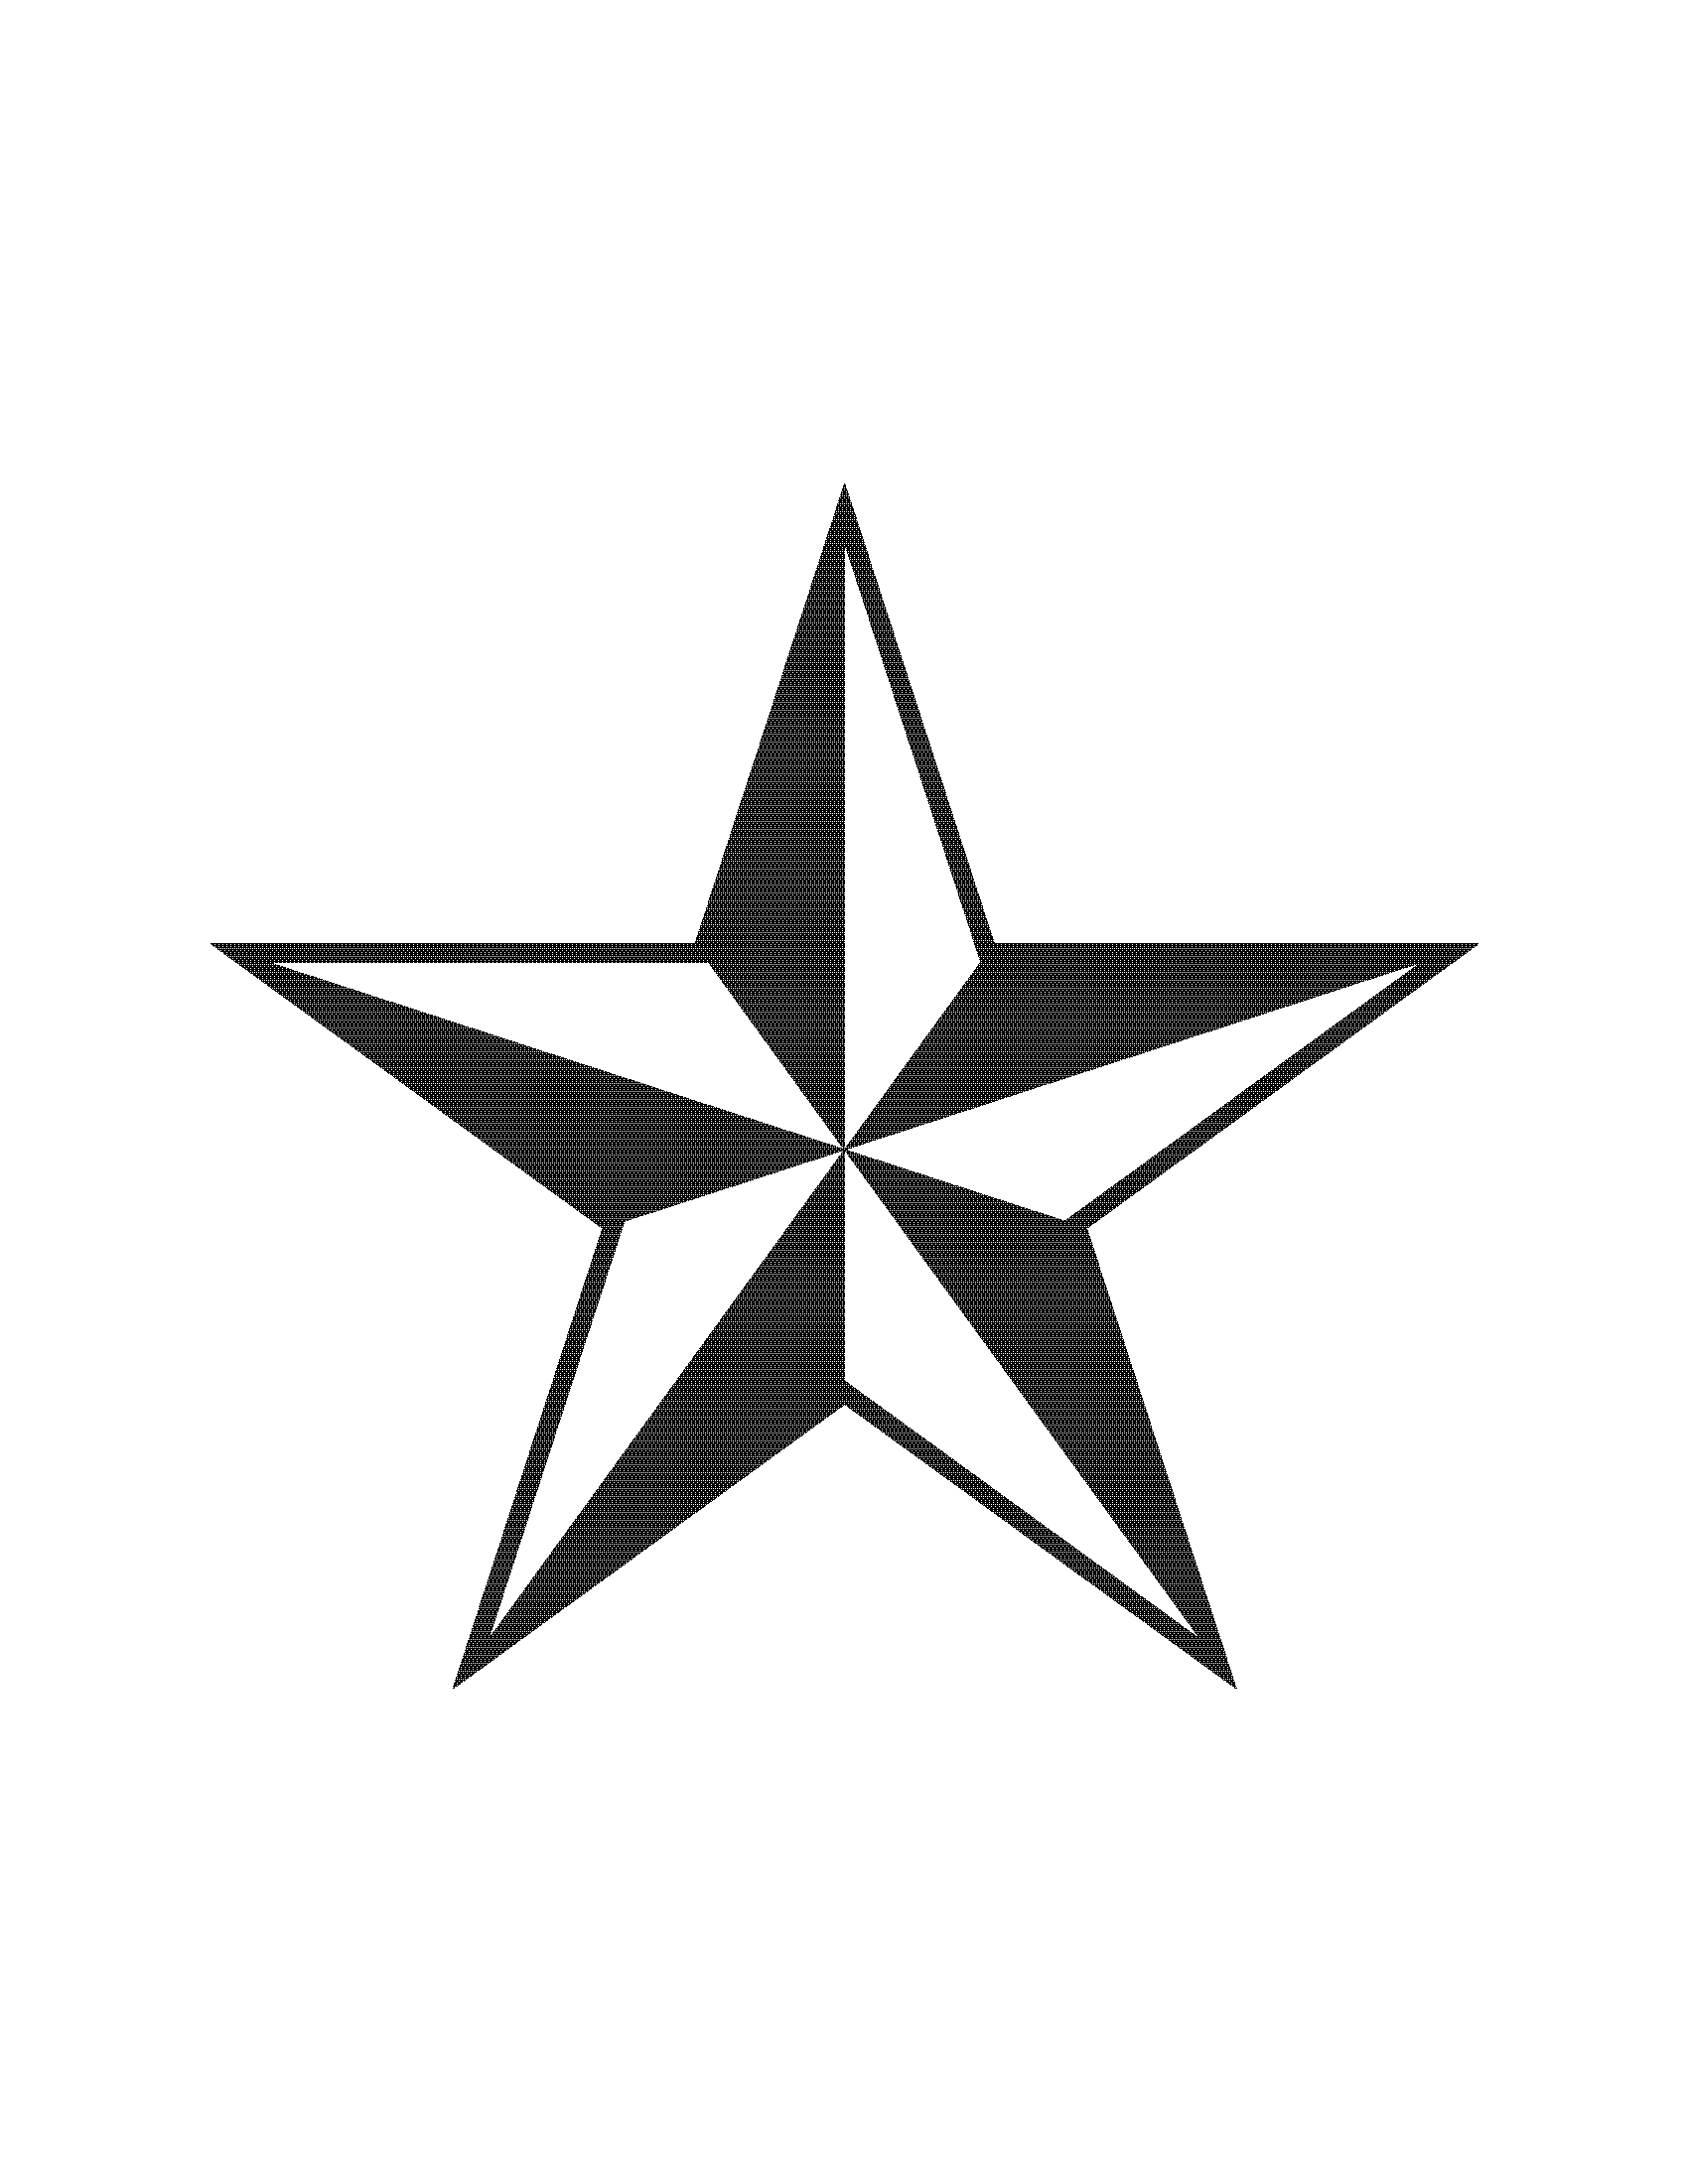 Star Clipart Black And White   Clipart Panda   Free Clipart Images